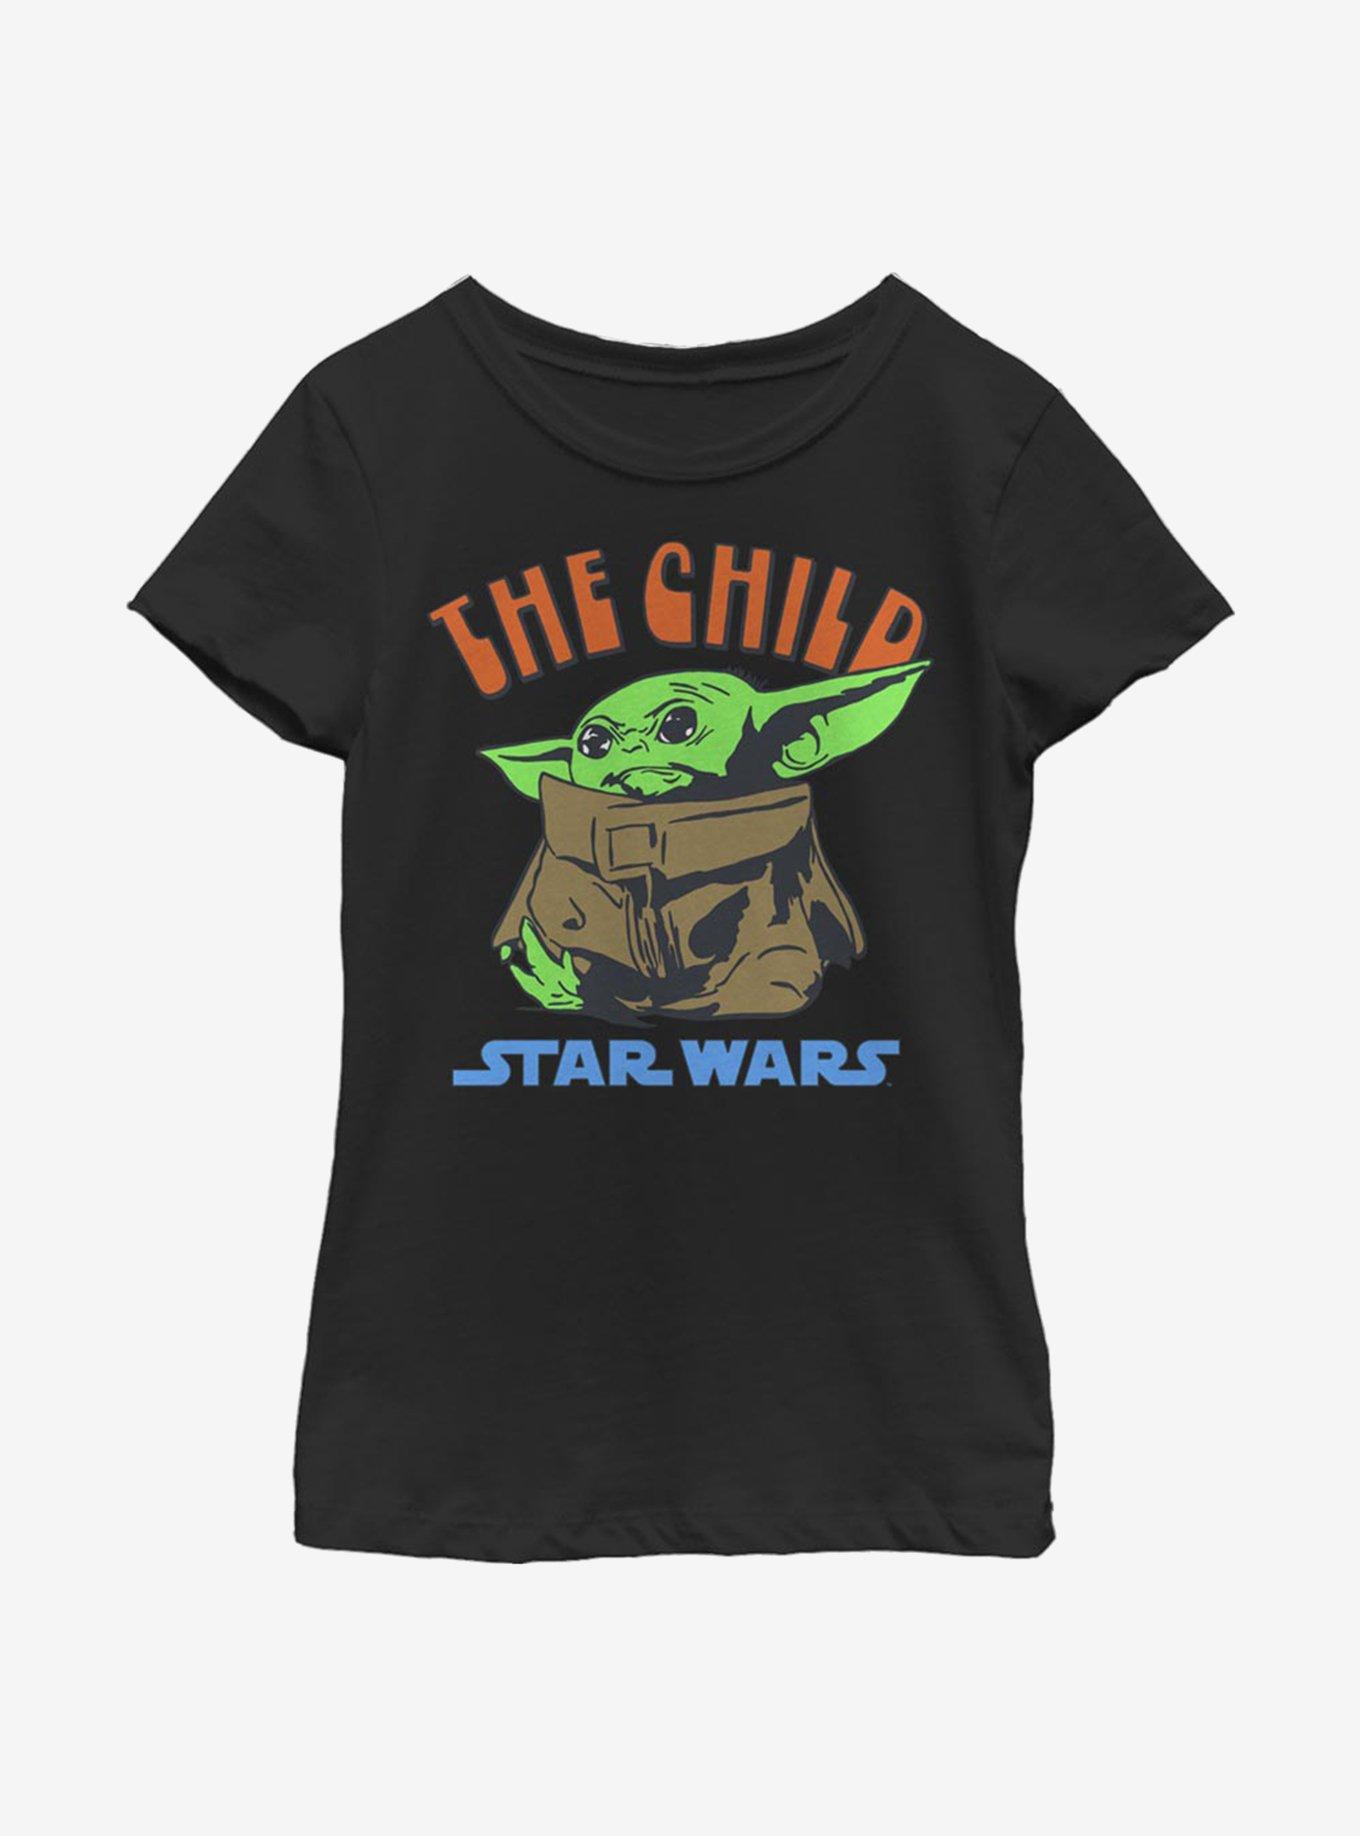 Star Wars The Mandalorian The Child Bright Letters Youth Girls T-Shirt, BLACK, hi-res